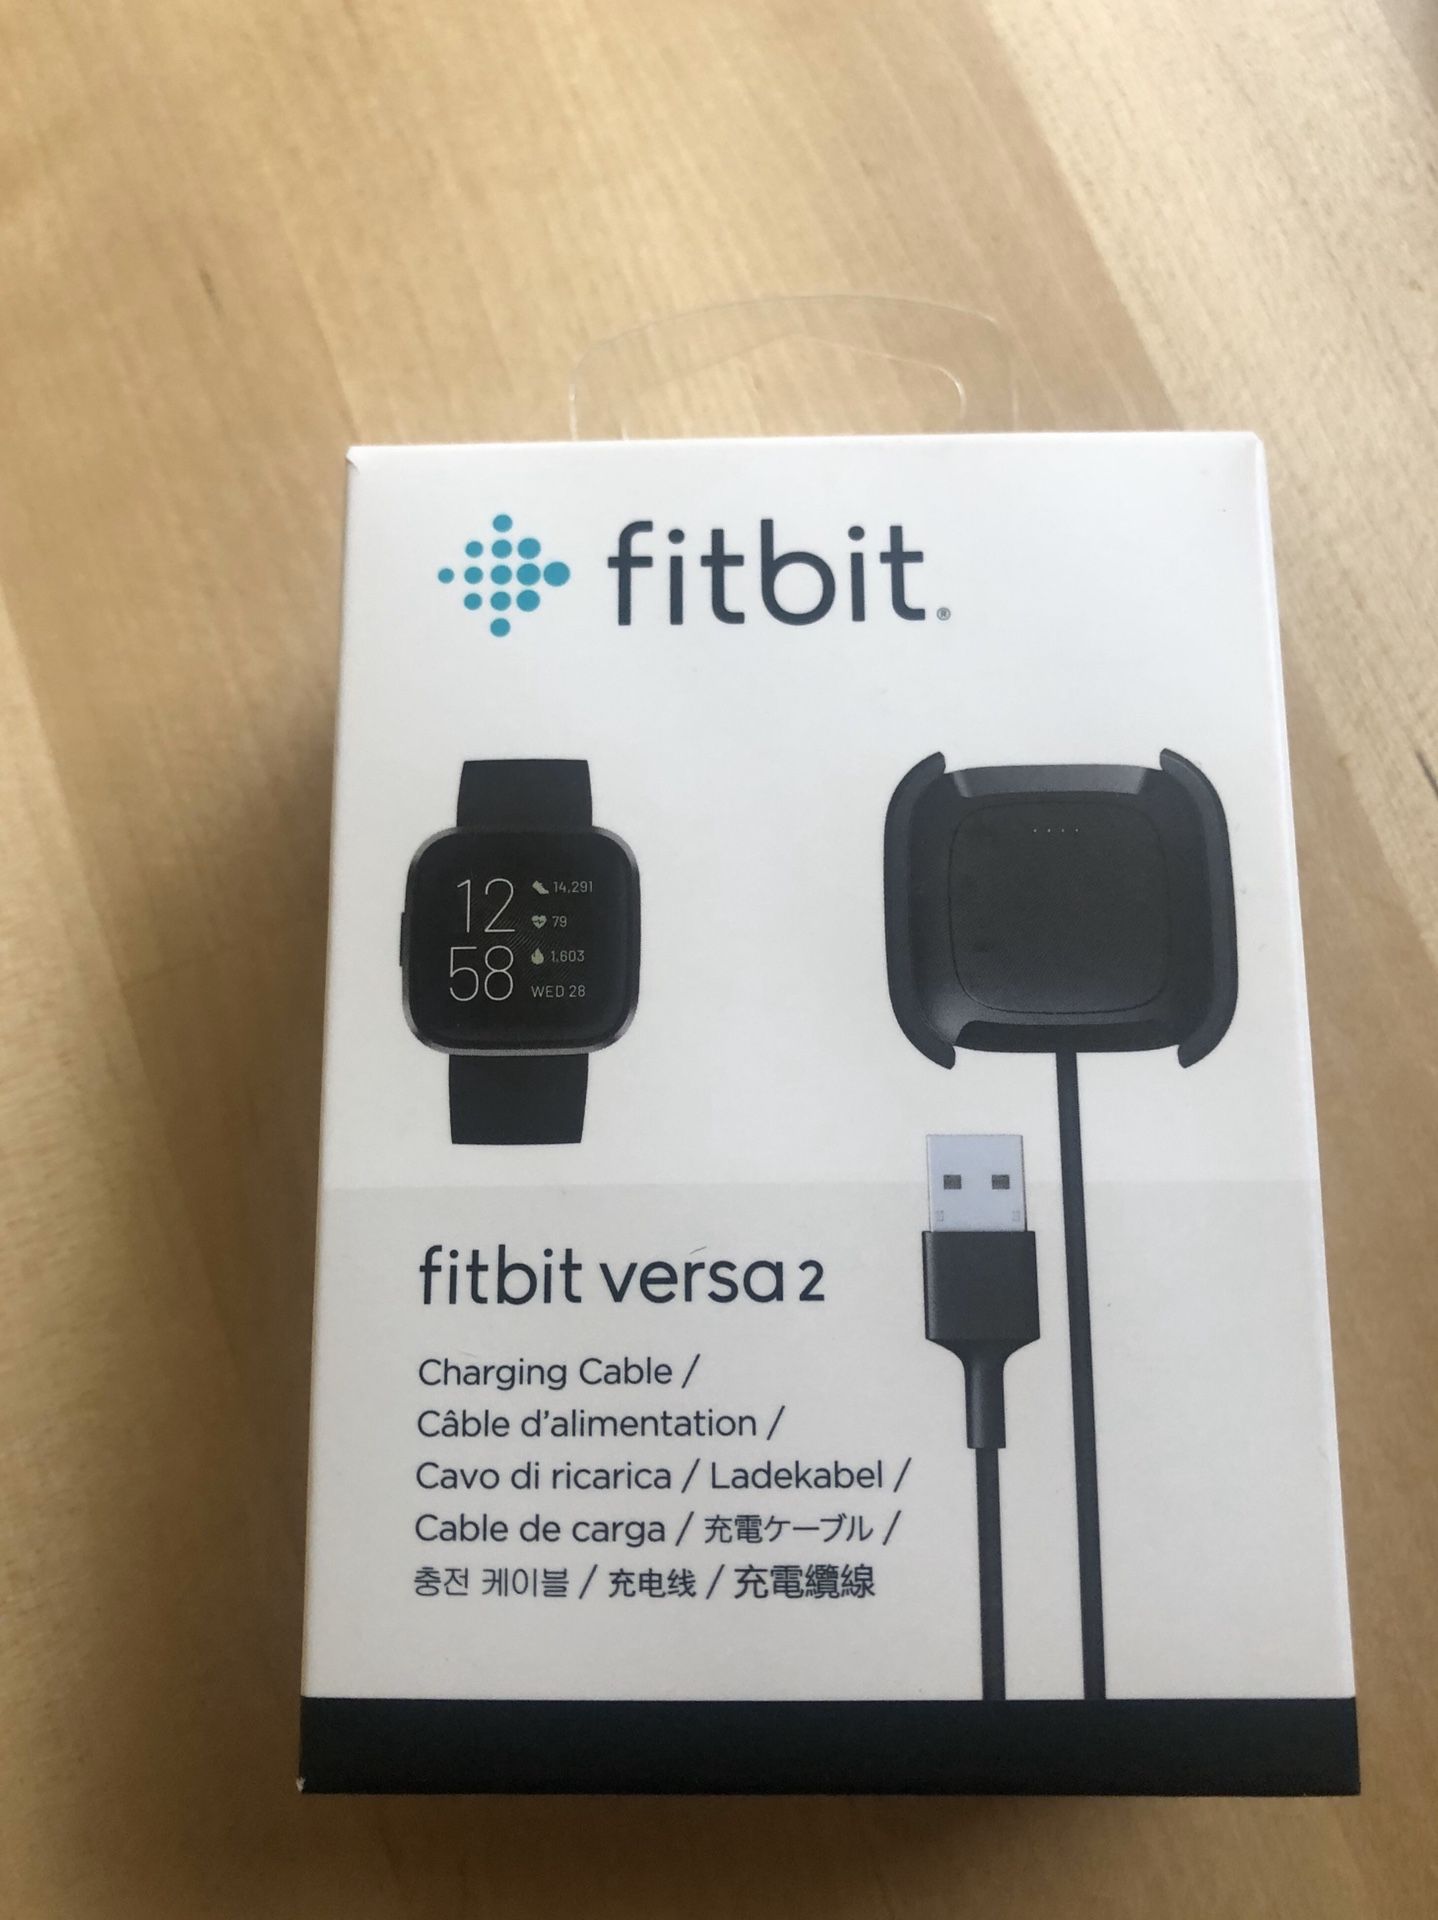 Official charging cable for Fitbit versa 2